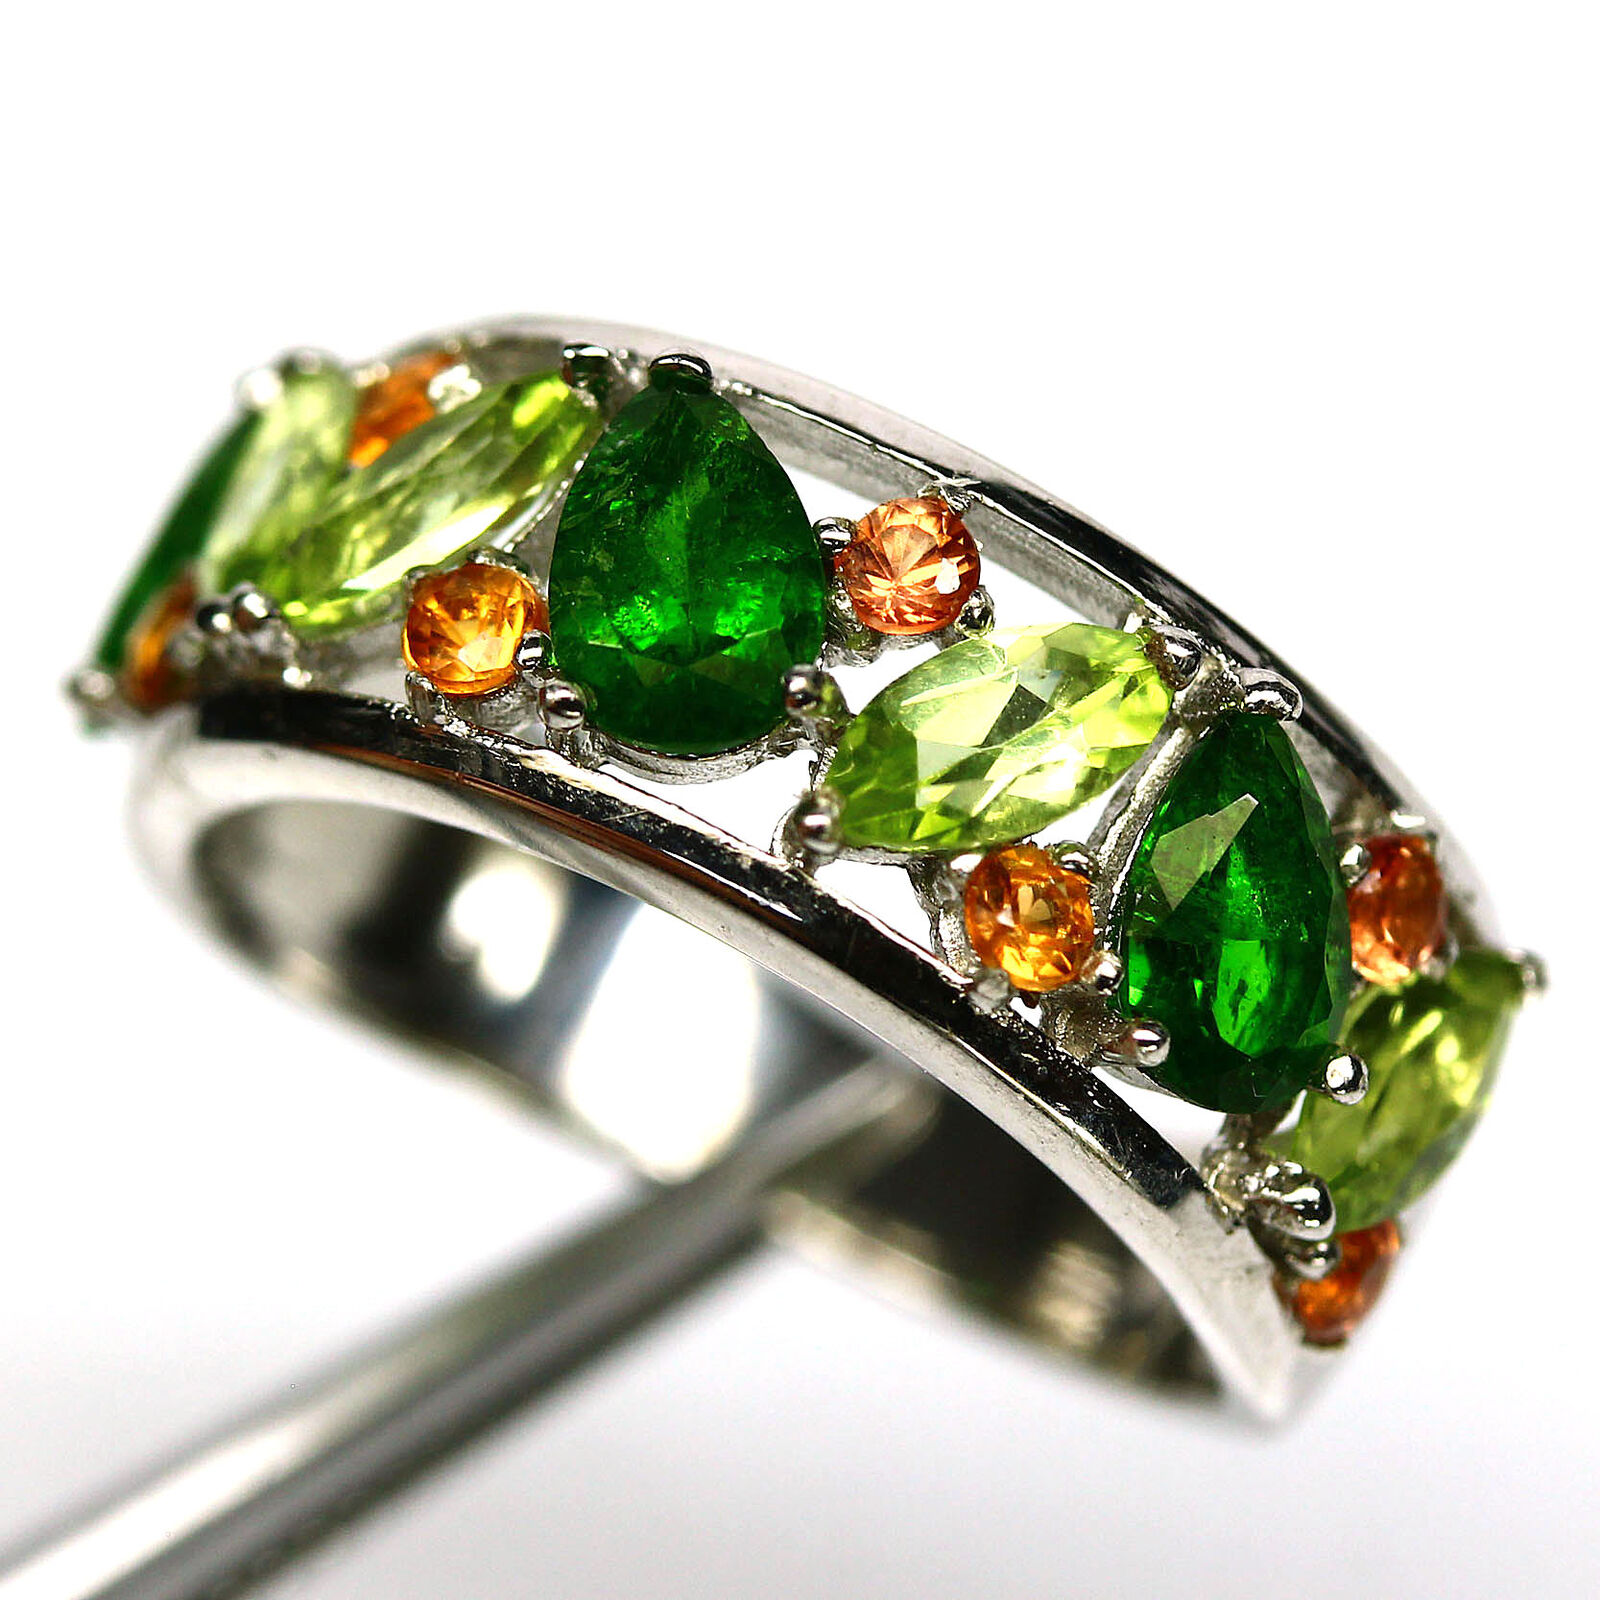 A matching 925 silver ring set with peridots, chrome diopsides and citrines, (O).